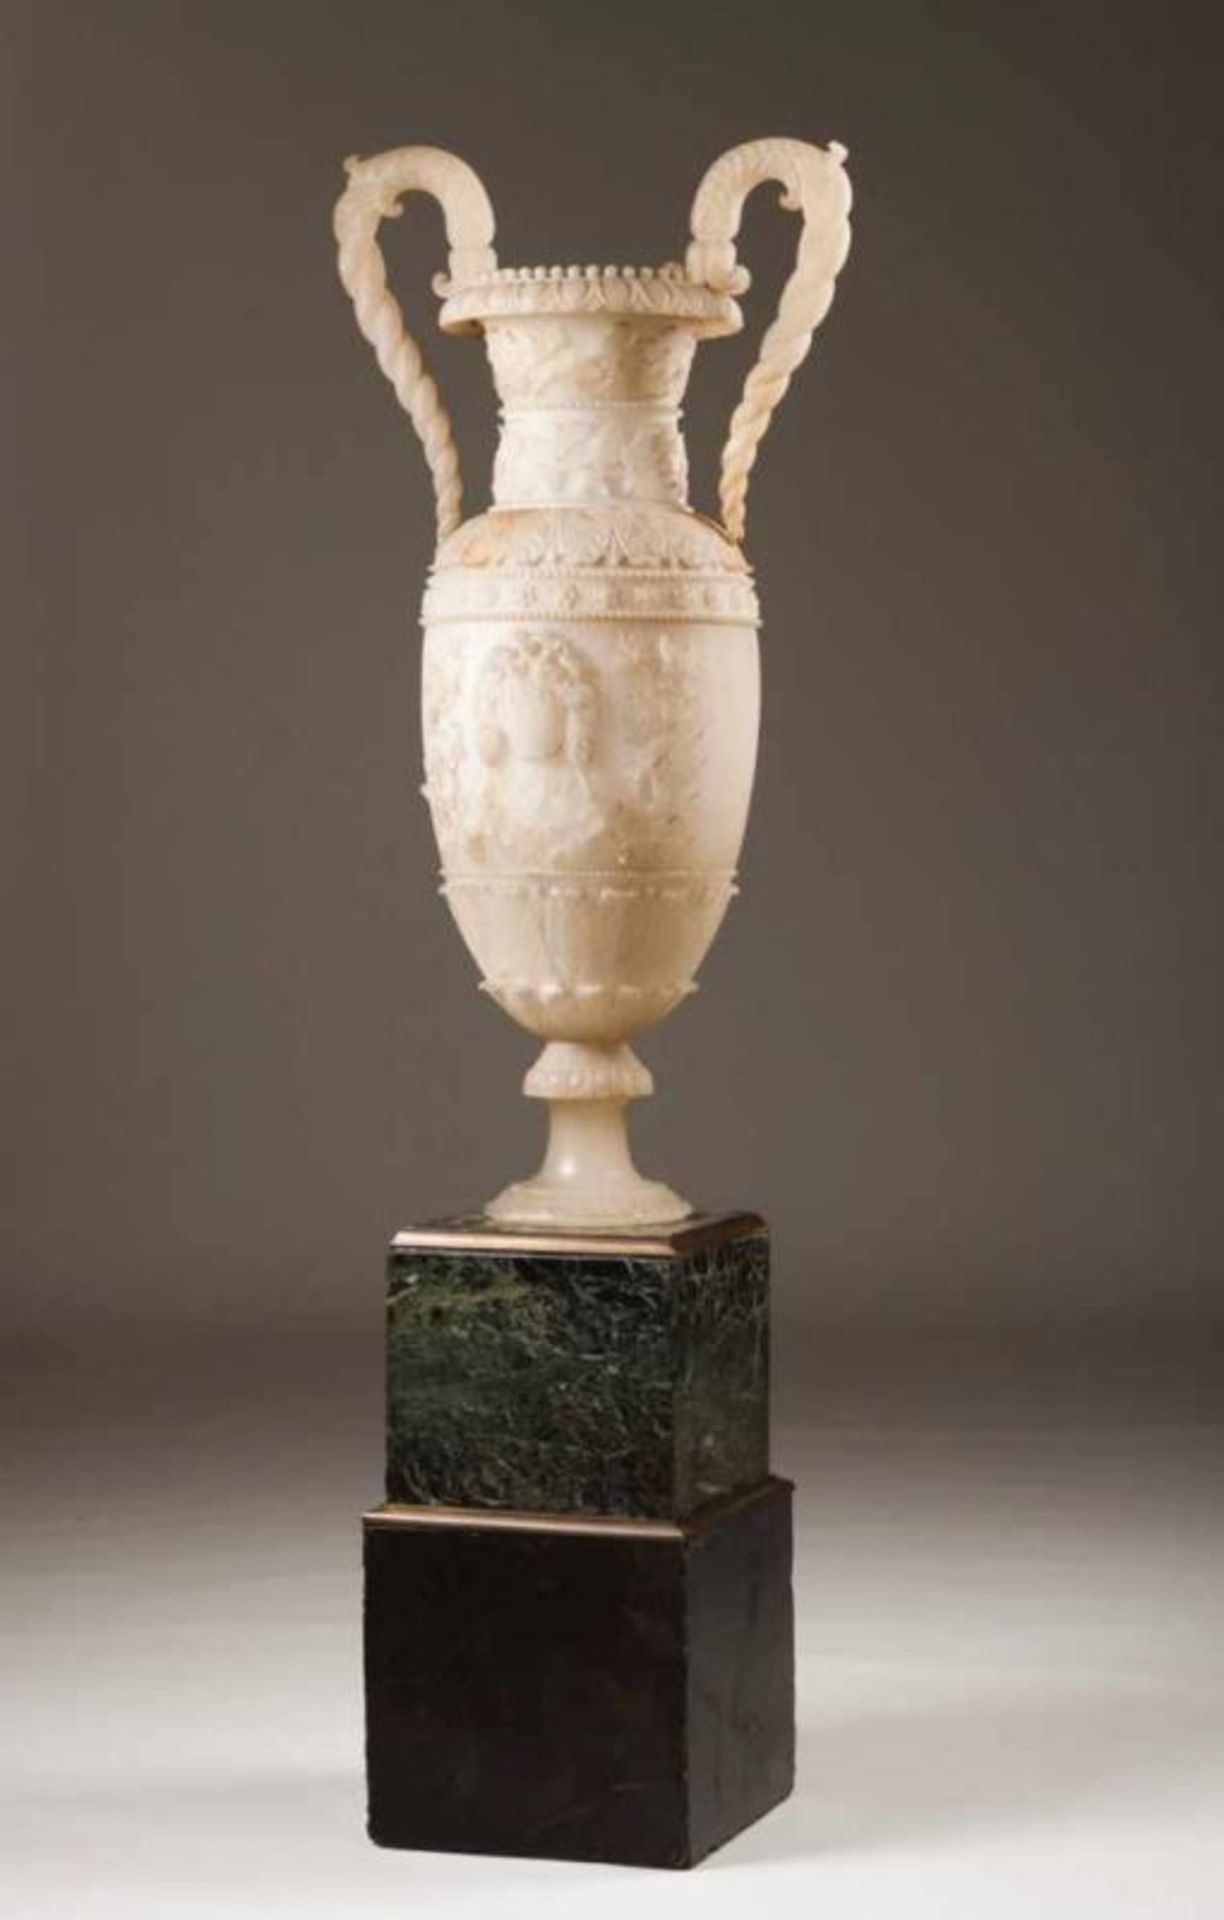 A pair of large urns Carved alabaster with vine leaves, grapes and other floral motifs Marble bases